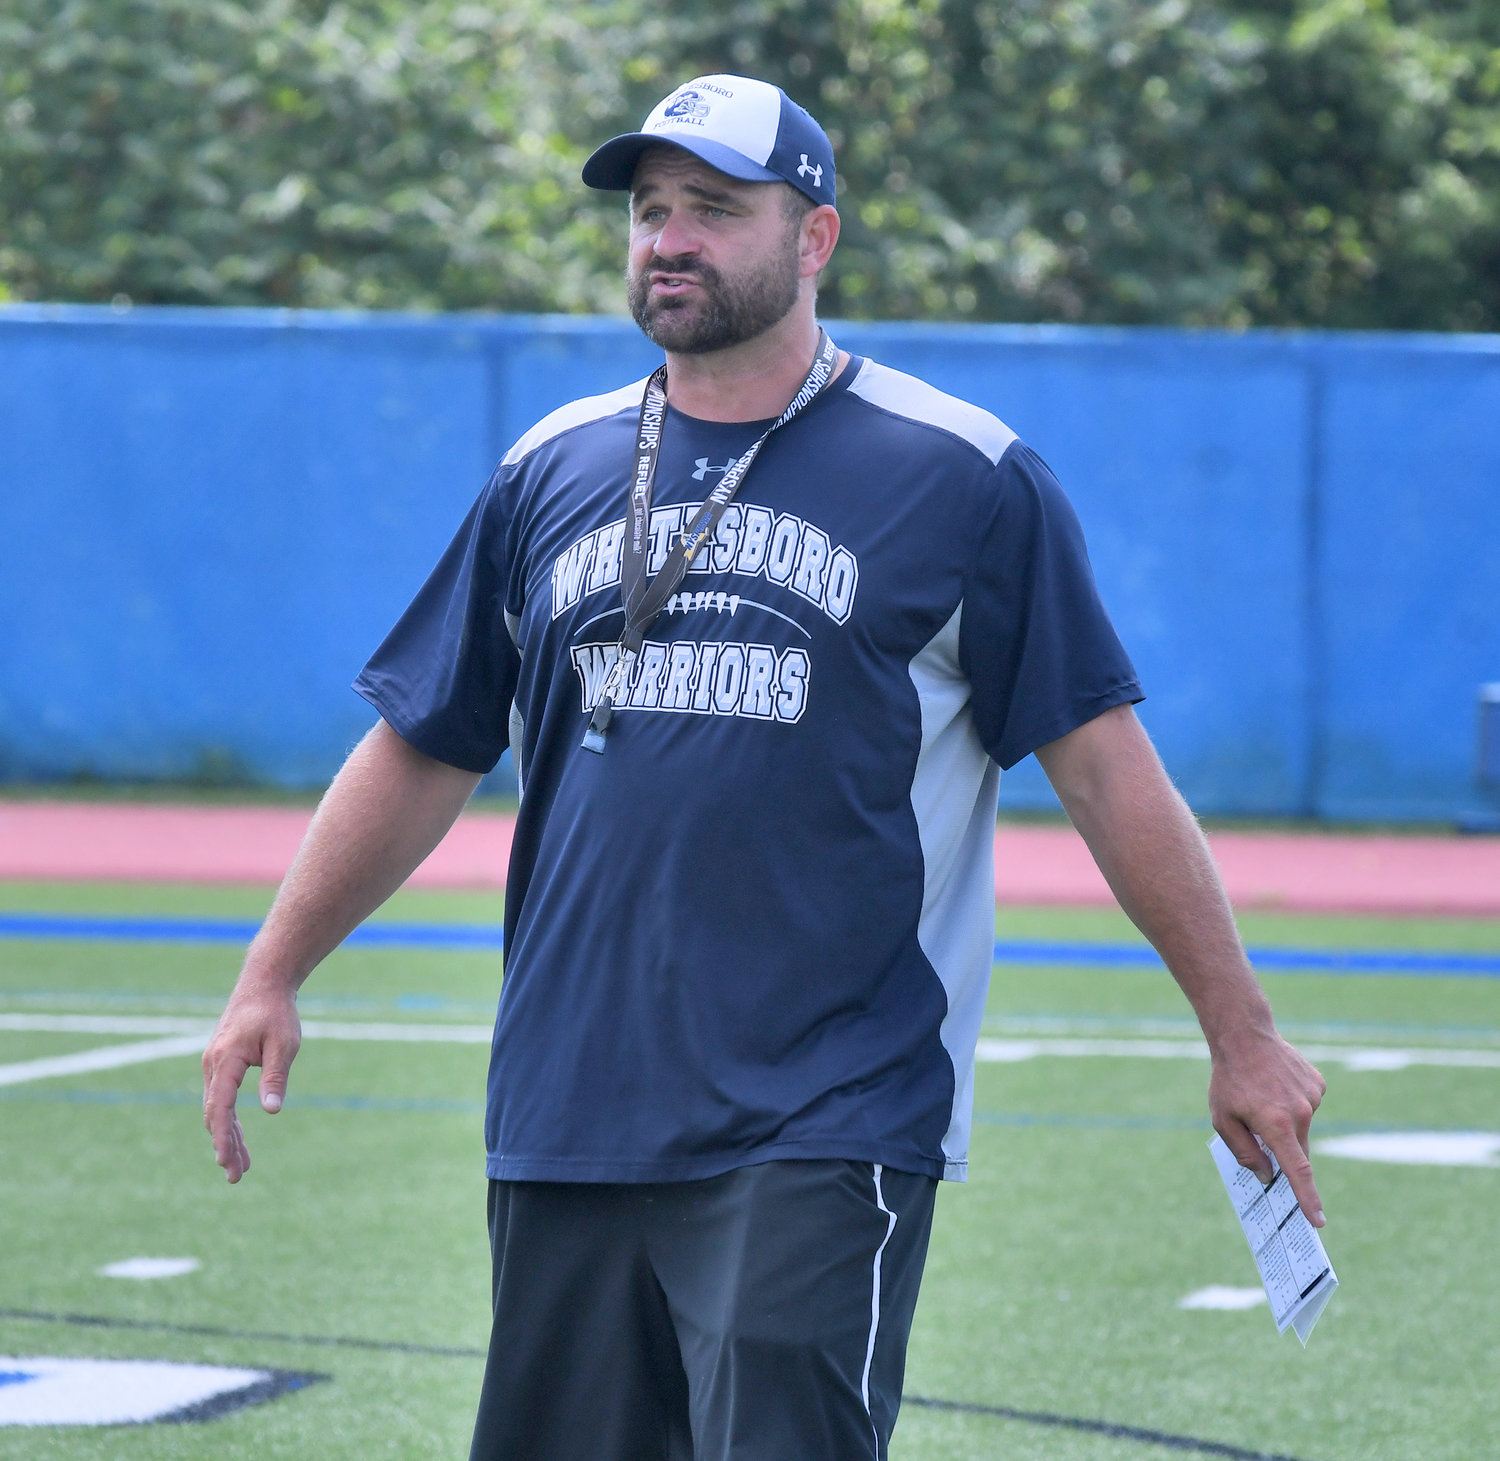 Curtis Schmidt is in his fourth season as head coach of the Whitesboro football team. The Warriors is 3-1 this season entering Friday’s game at New Hartford.